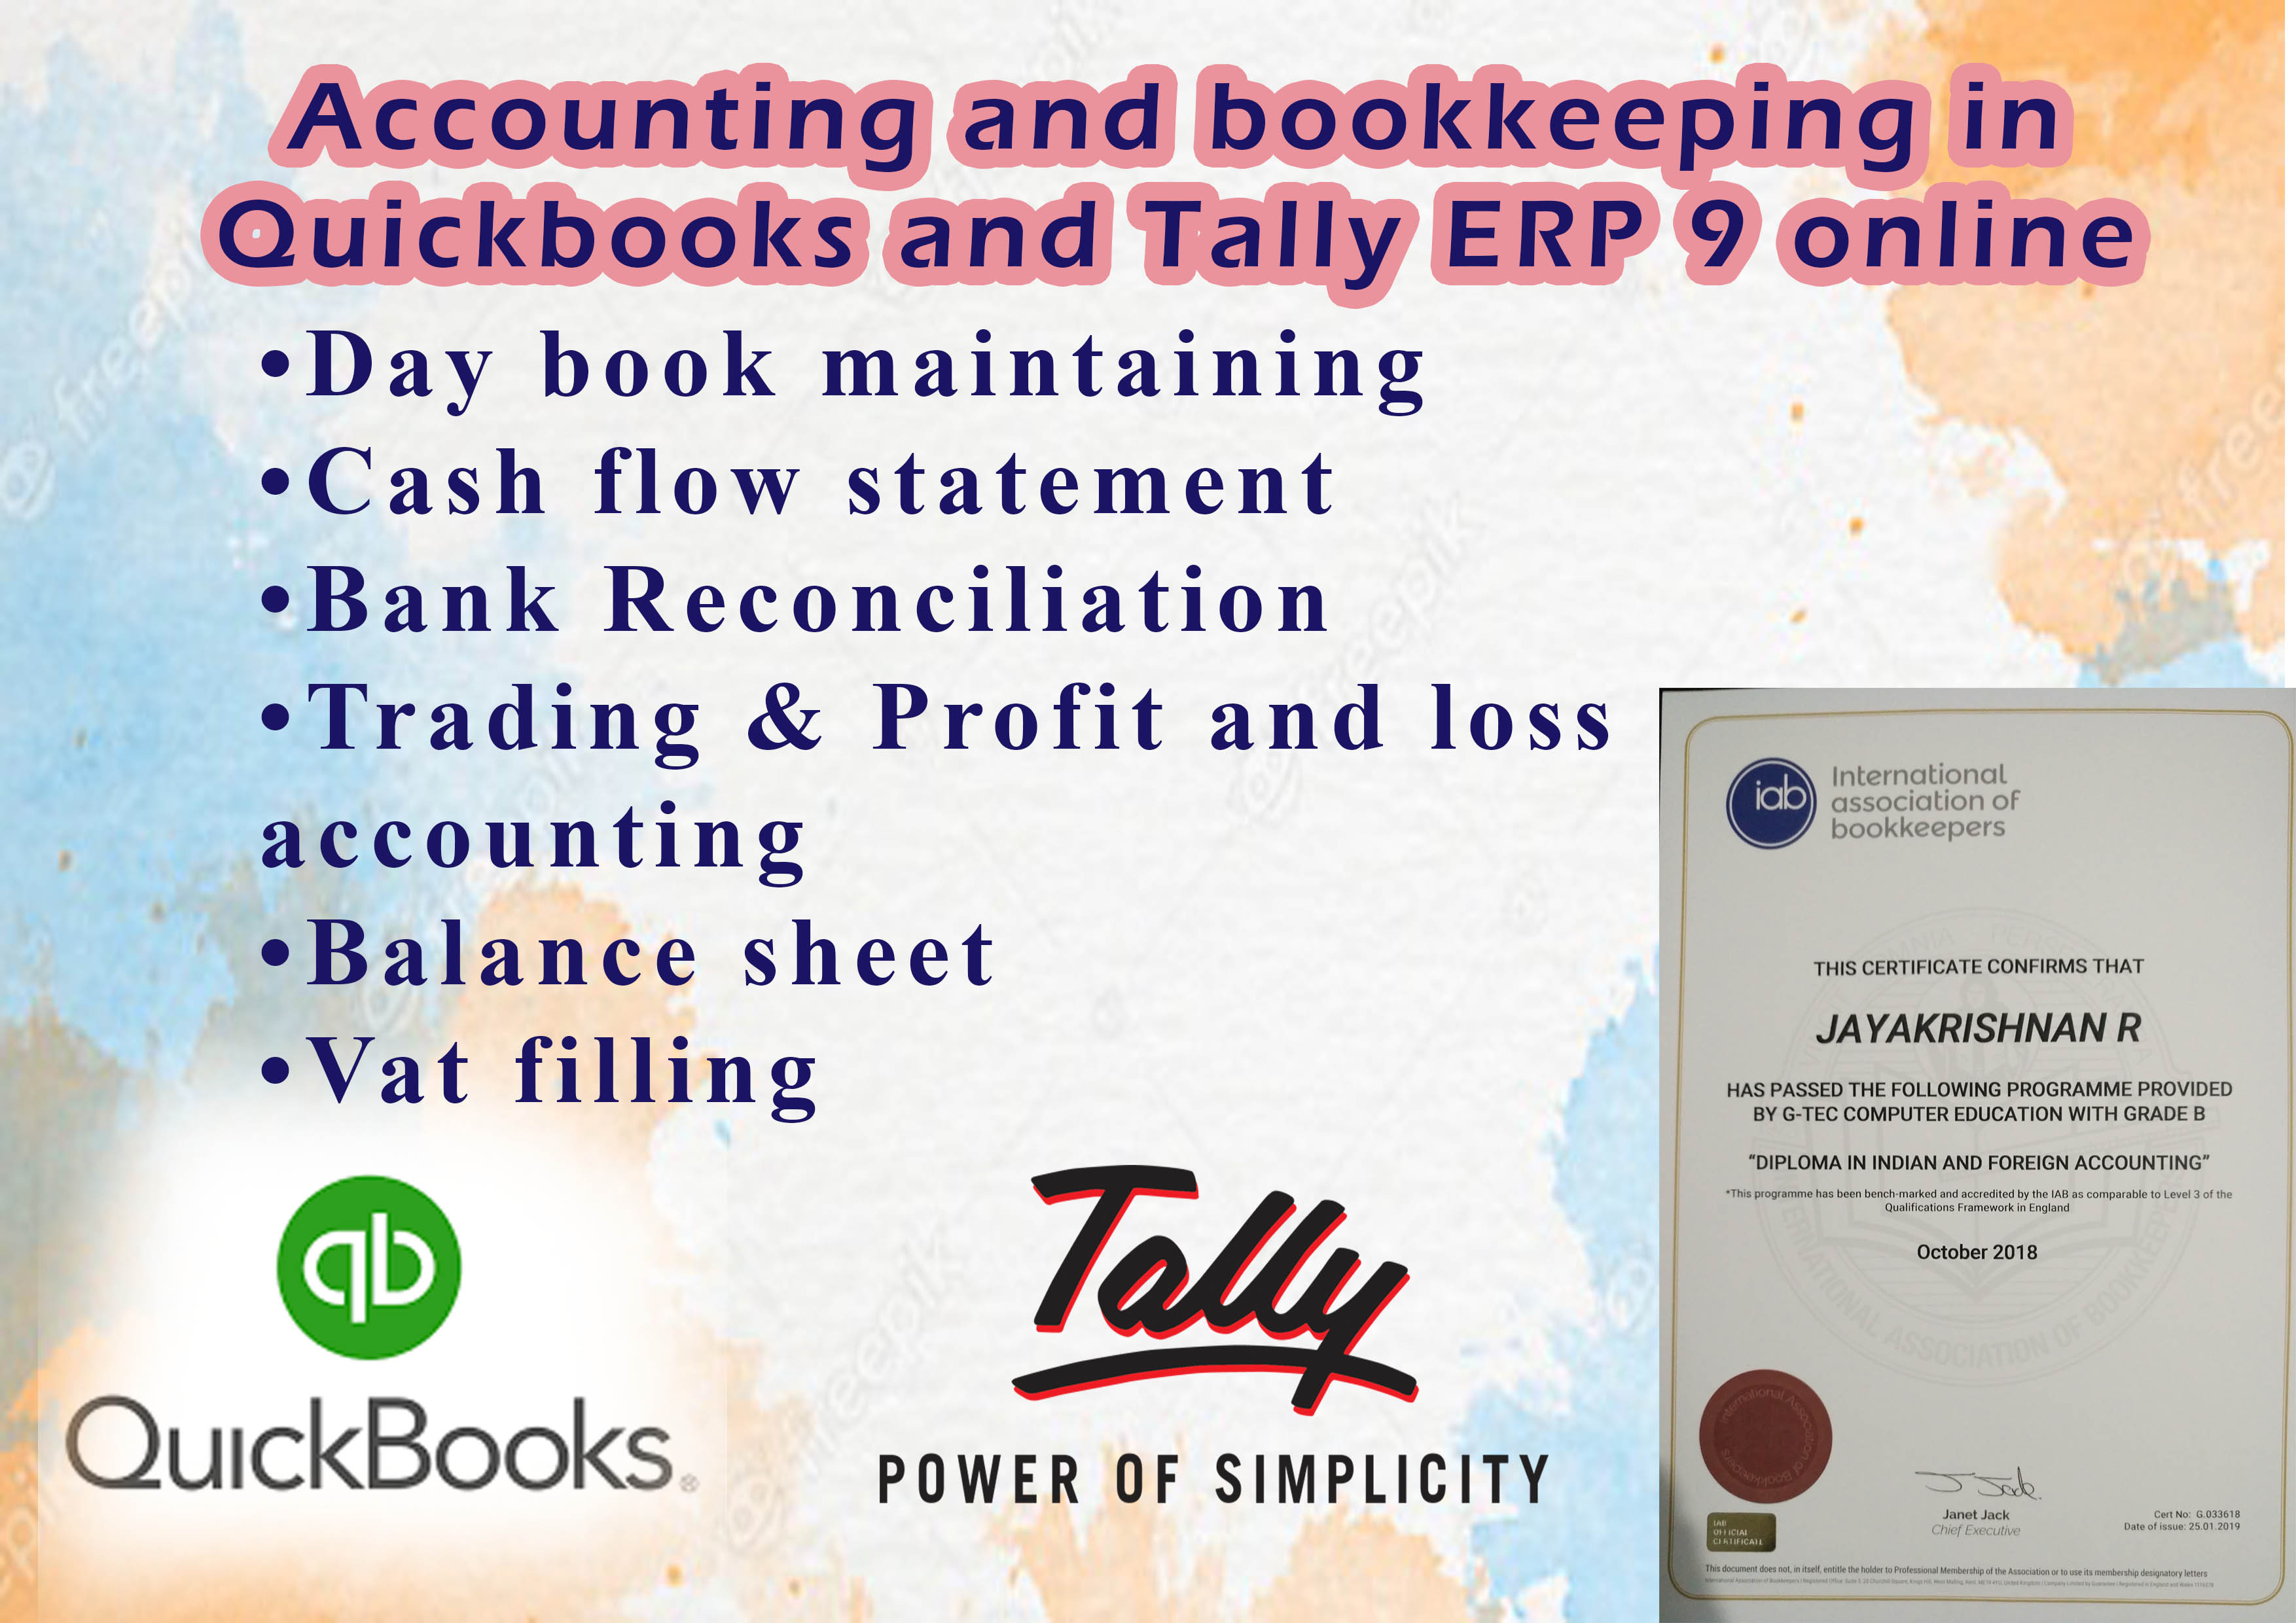 audit trail in tally erp 9